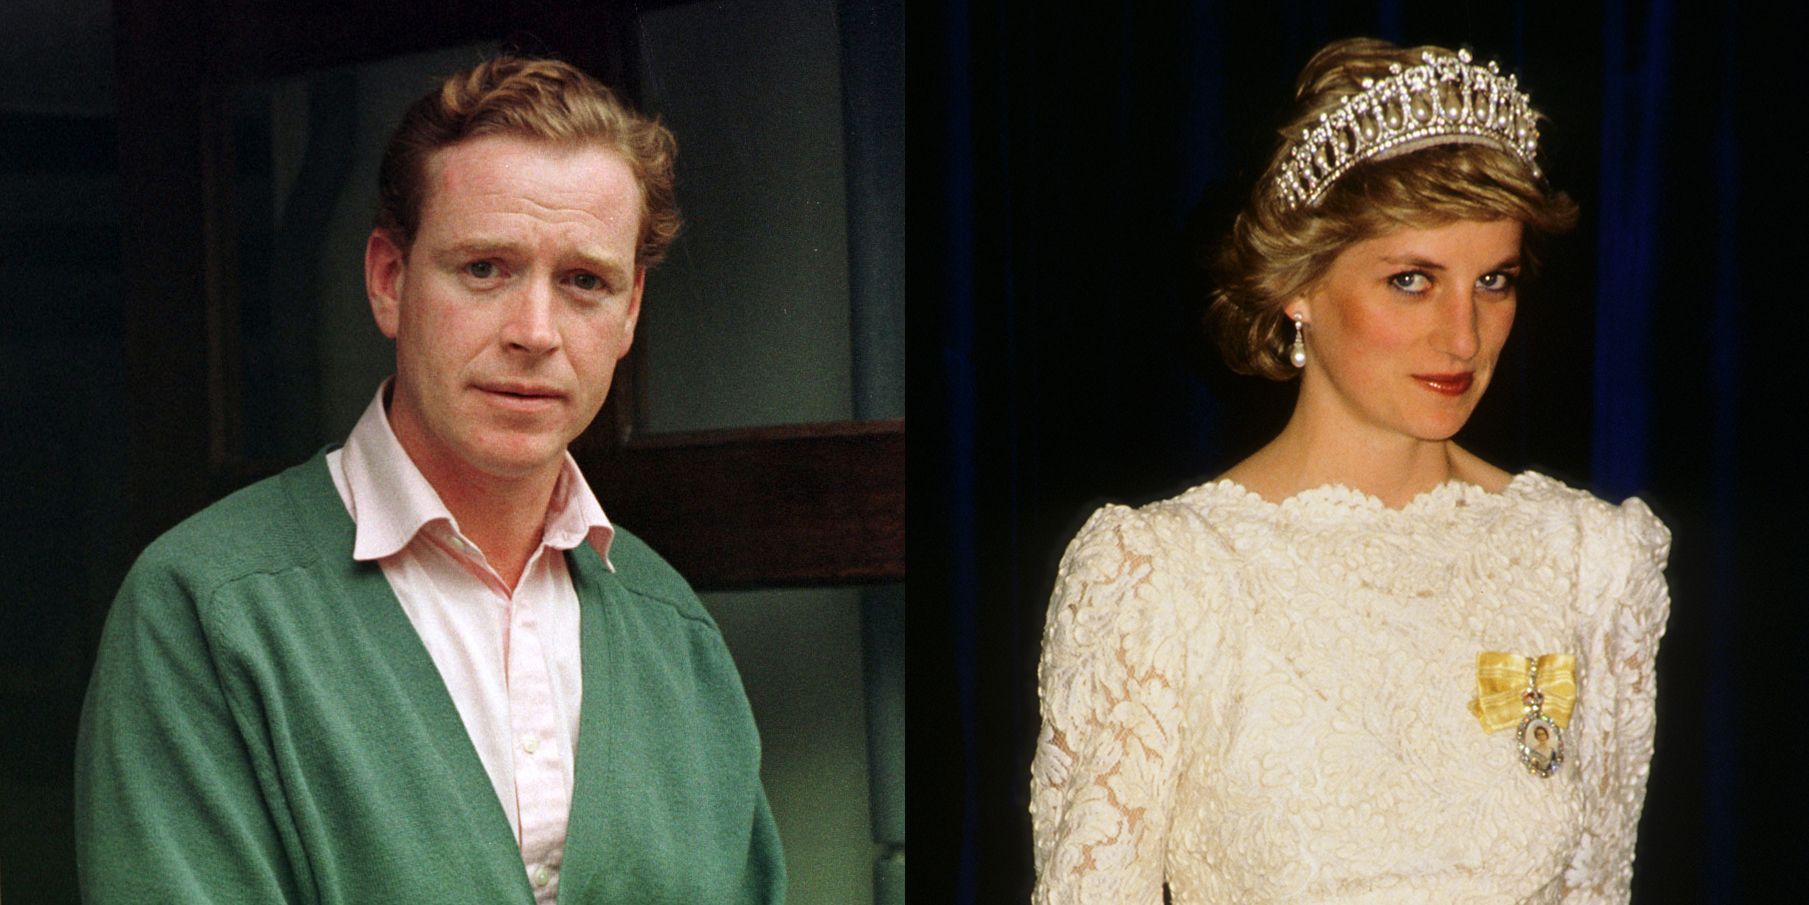 Who Is Major James Hewitt? - Princess Diana's Former Lover Facts